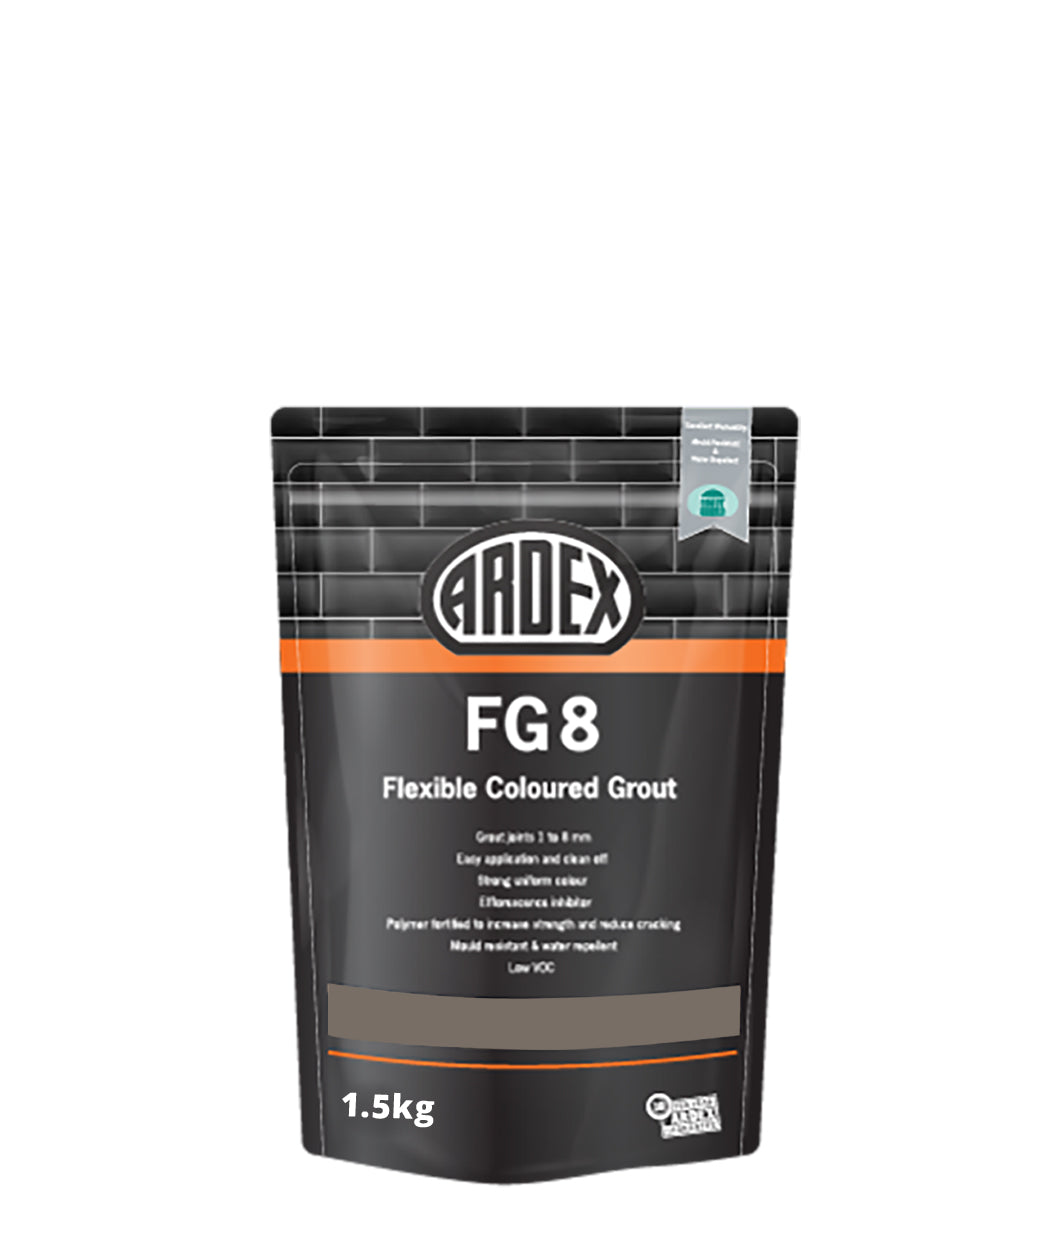 FG8 Flexible Coloured Grout - Stone Doctor Australia - Flooring Tools > Cement Based > Tile Grouts